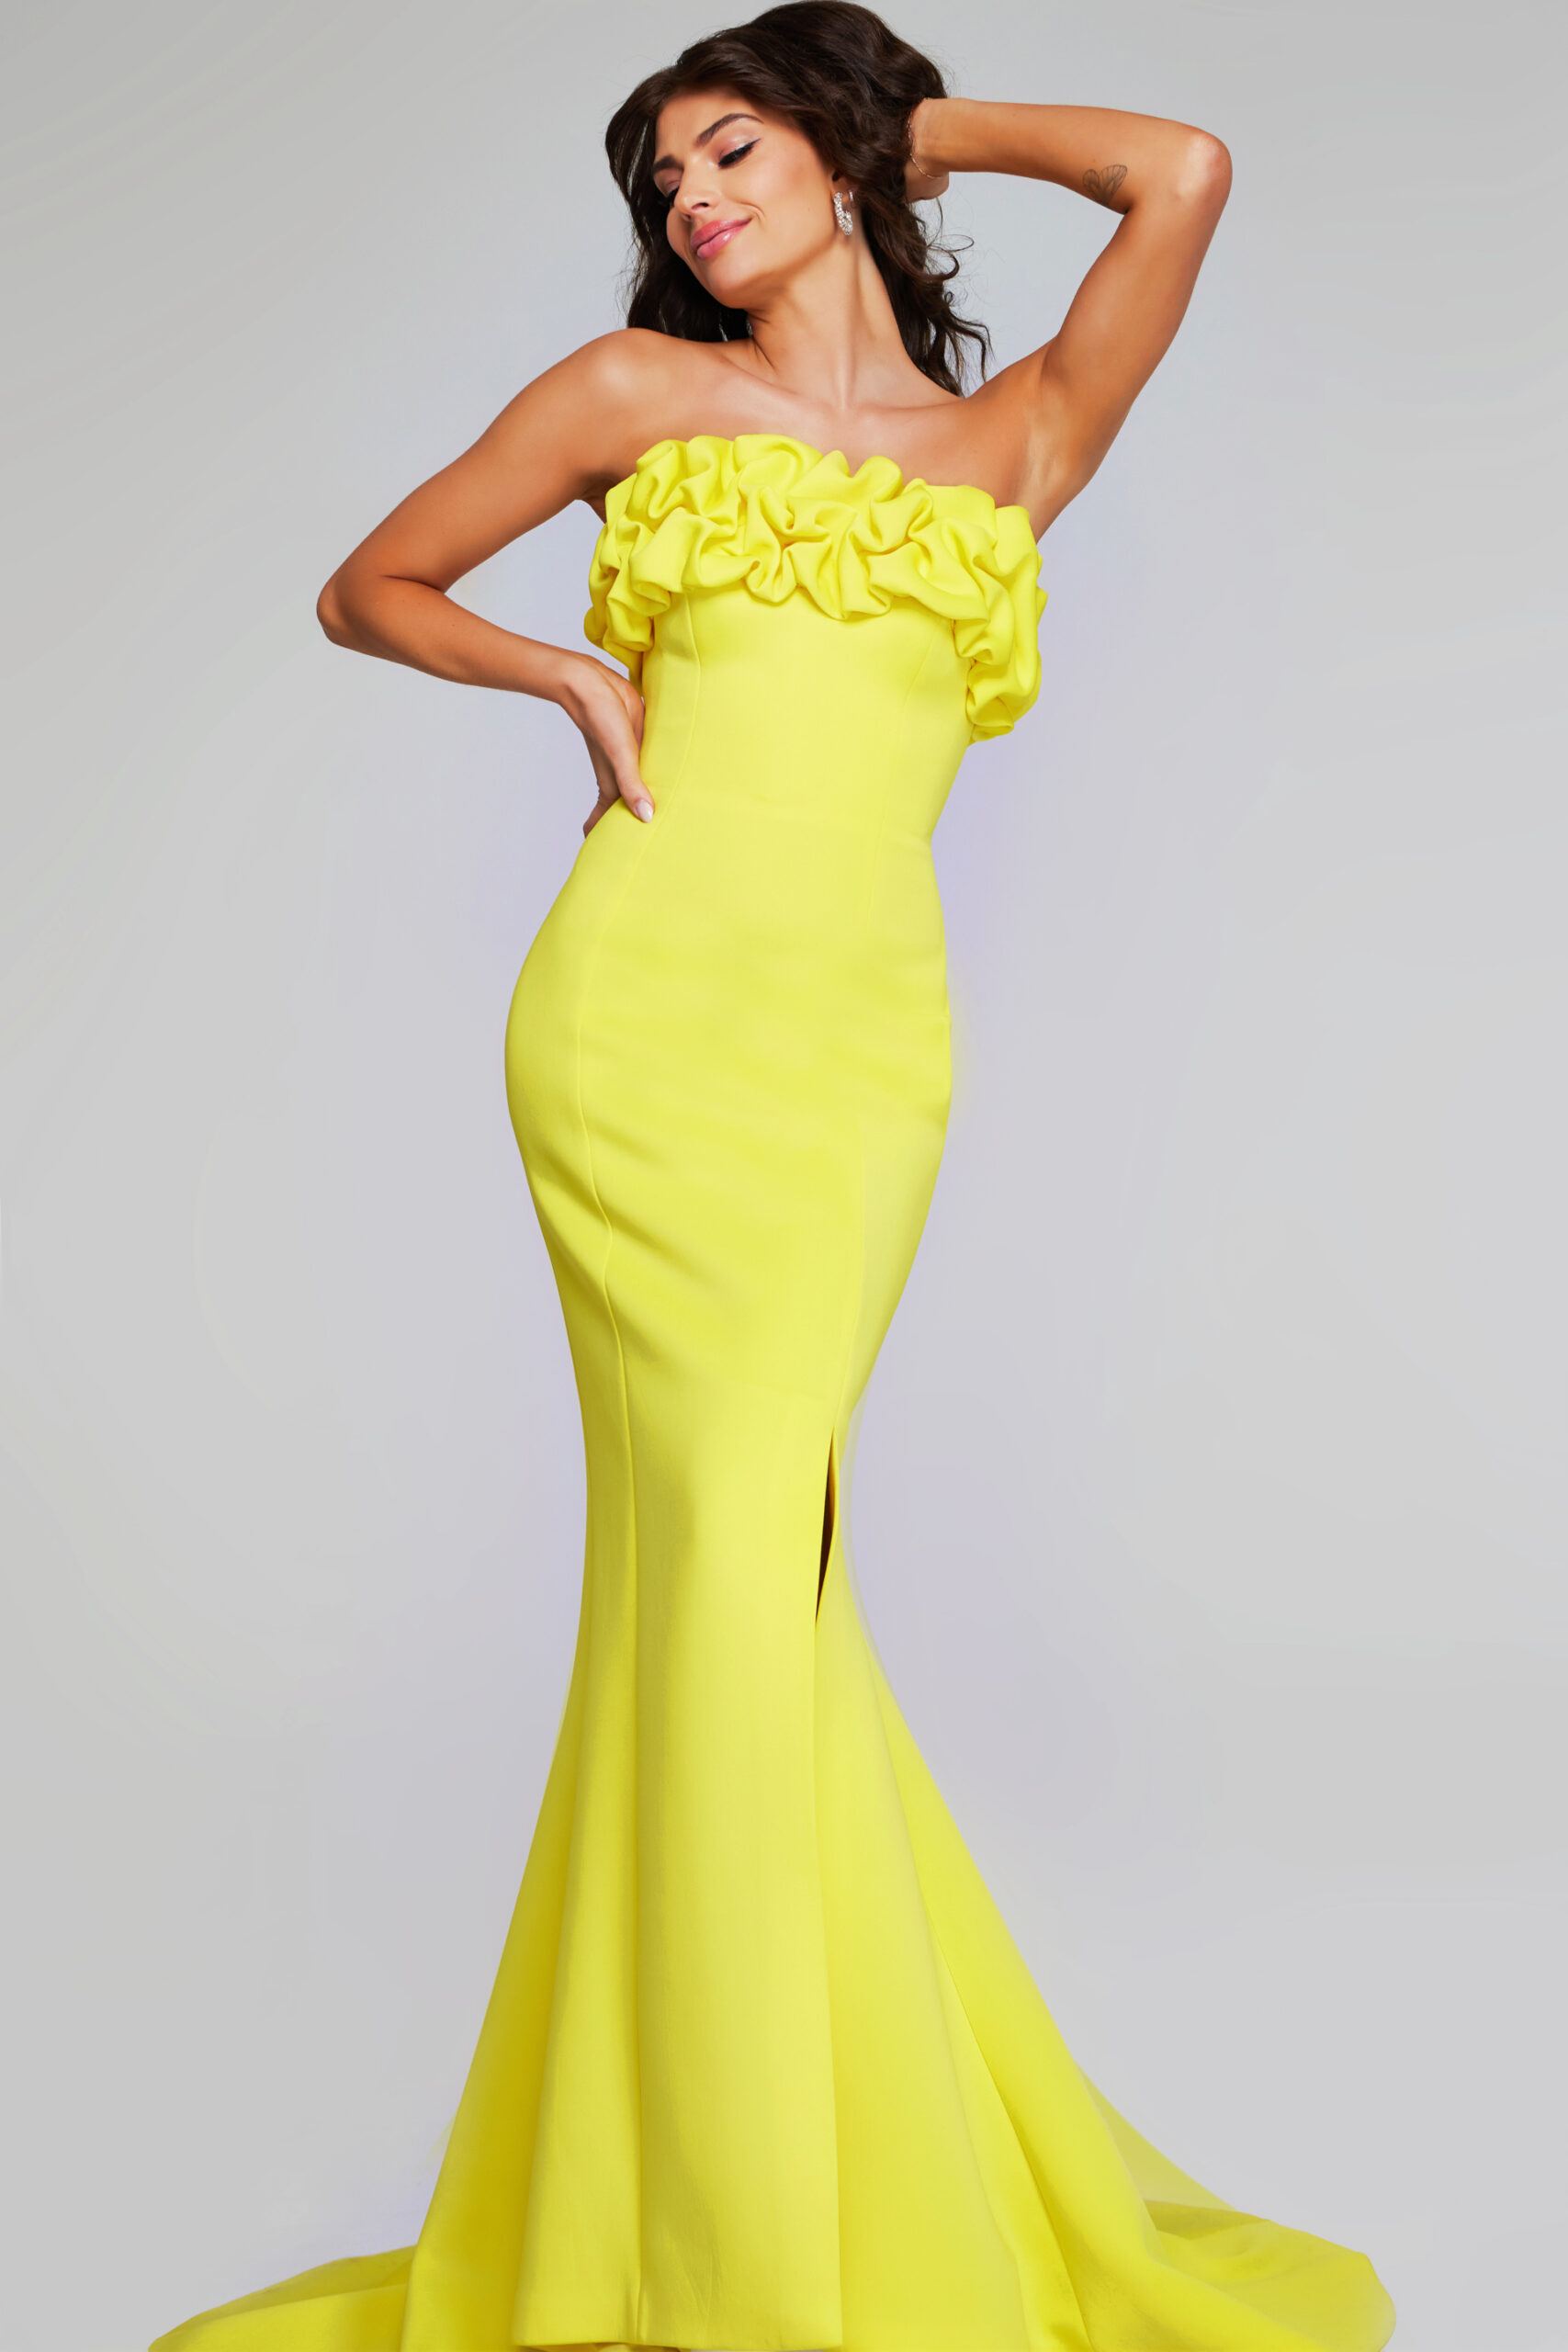 Stunning Strapless Yellow Gown with Ruffled Bodice 38922